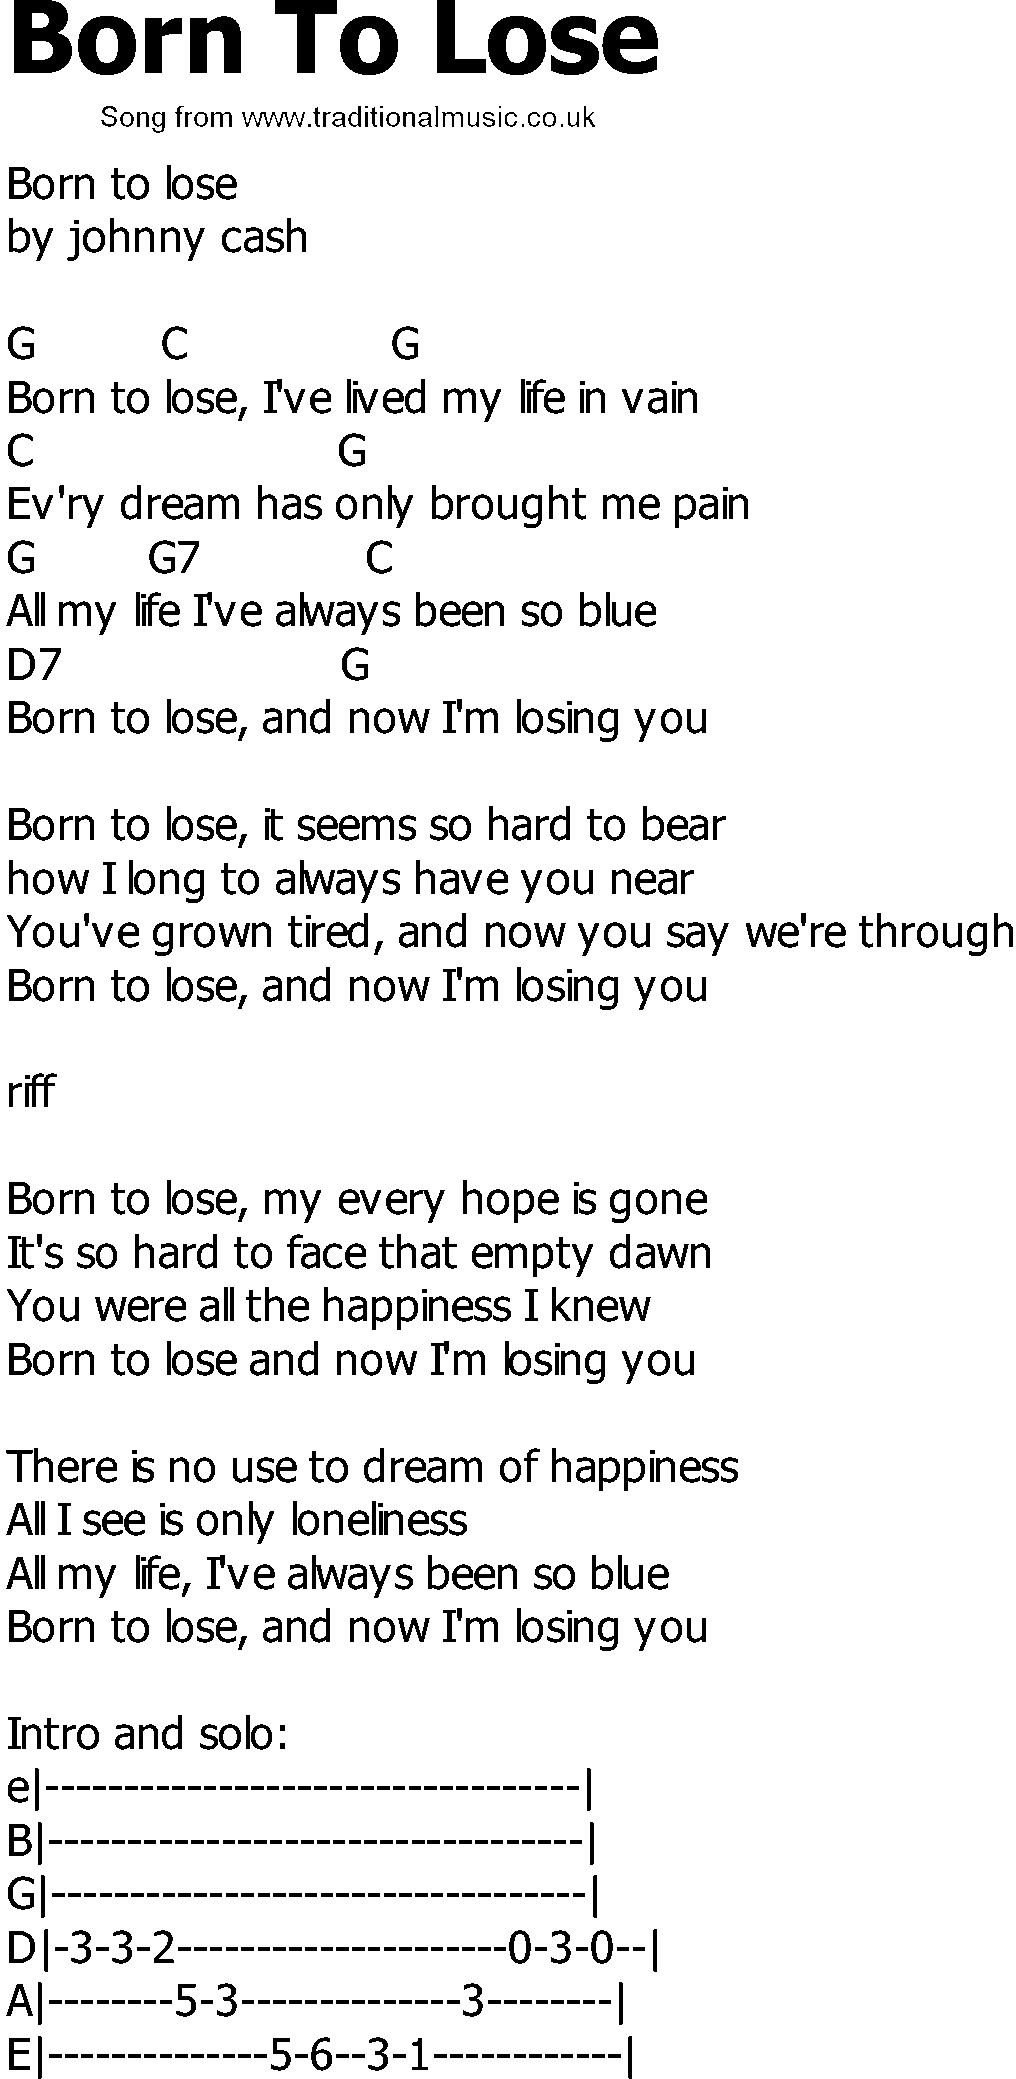 Old Country song lyrics with chords - Born To Lose